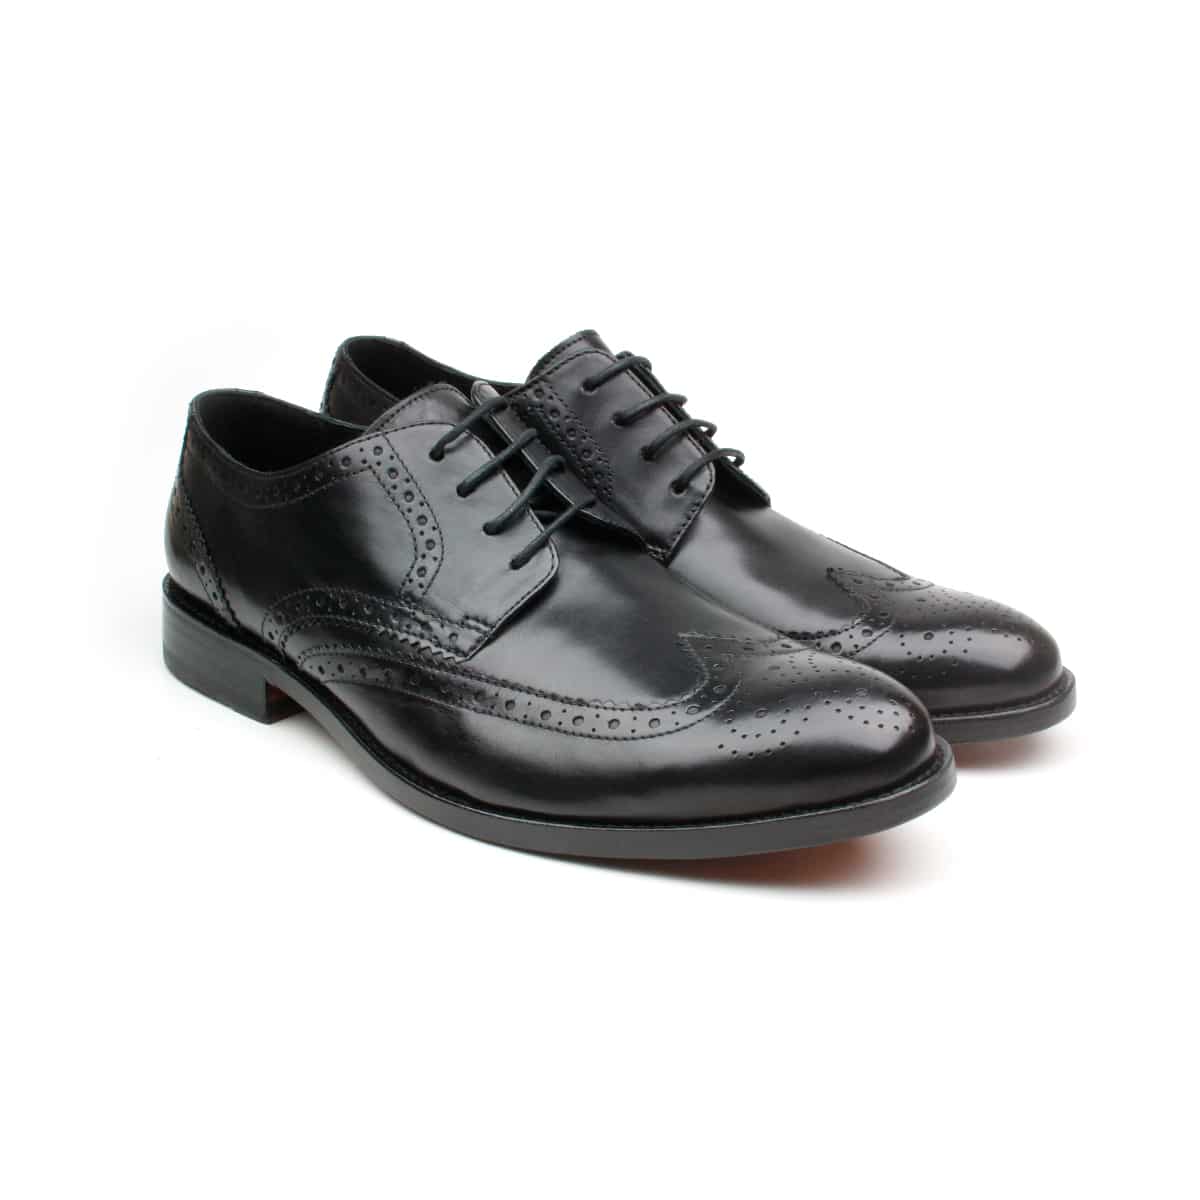 clarks james wing shoes